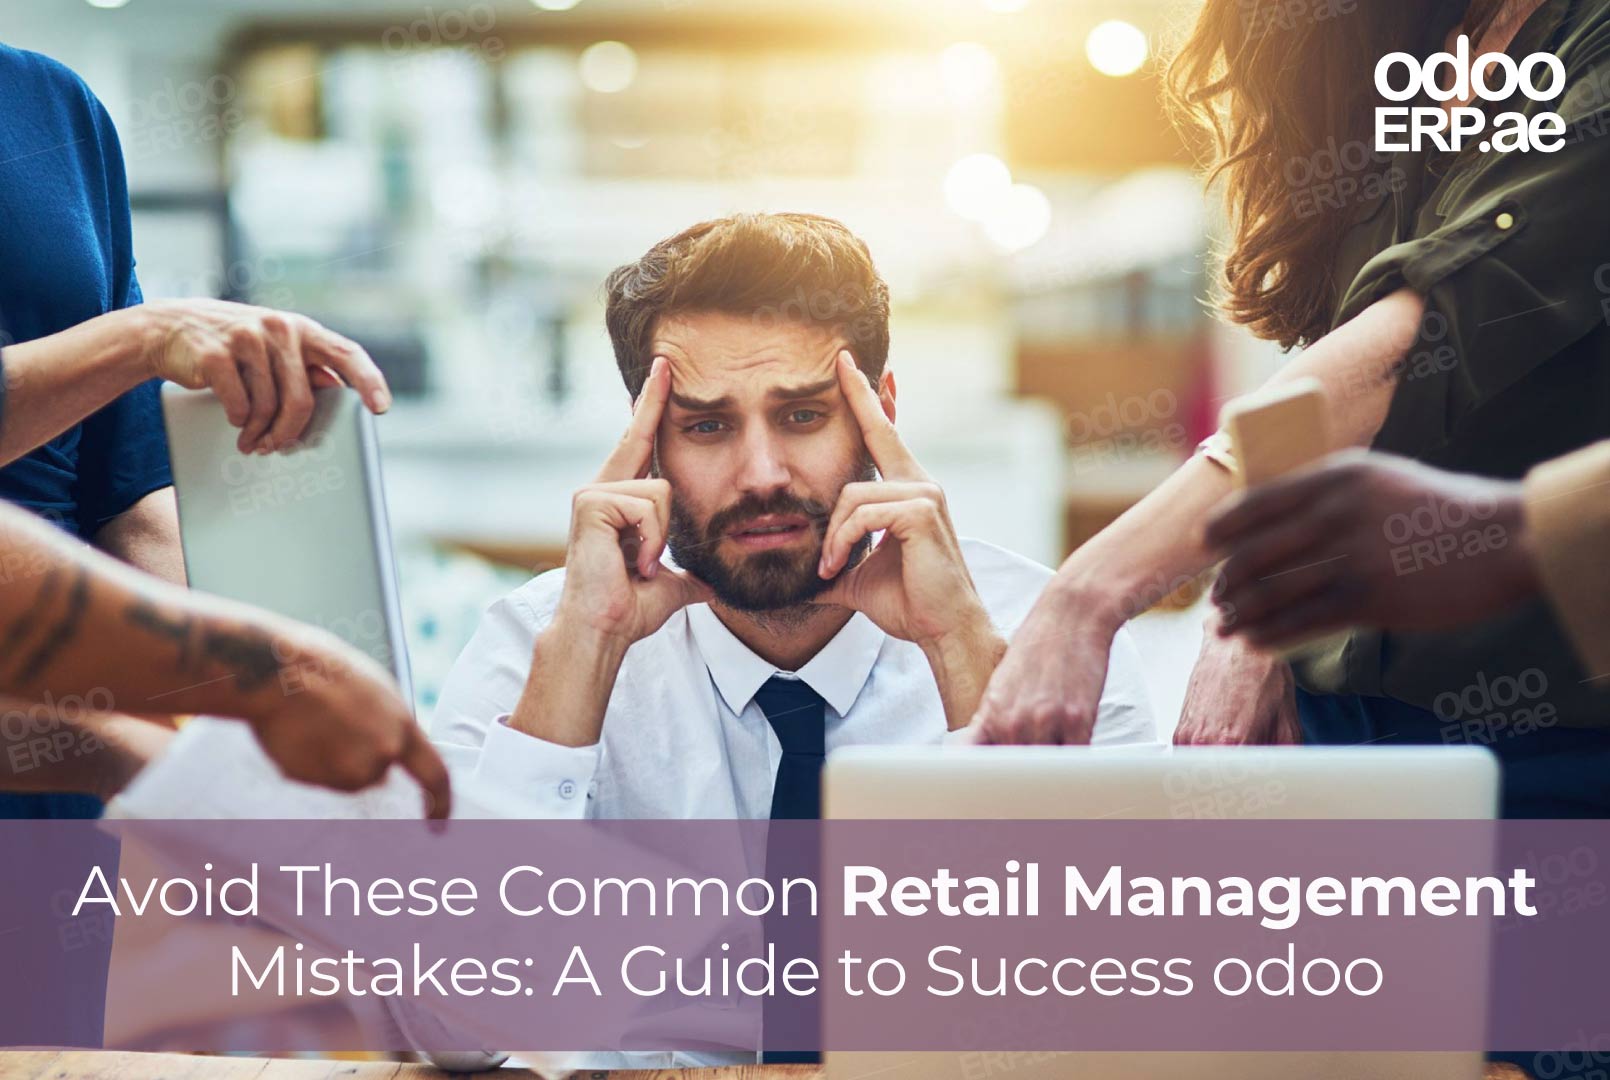 Avoid These Common Retail Management Mistakes: A Guide to Success